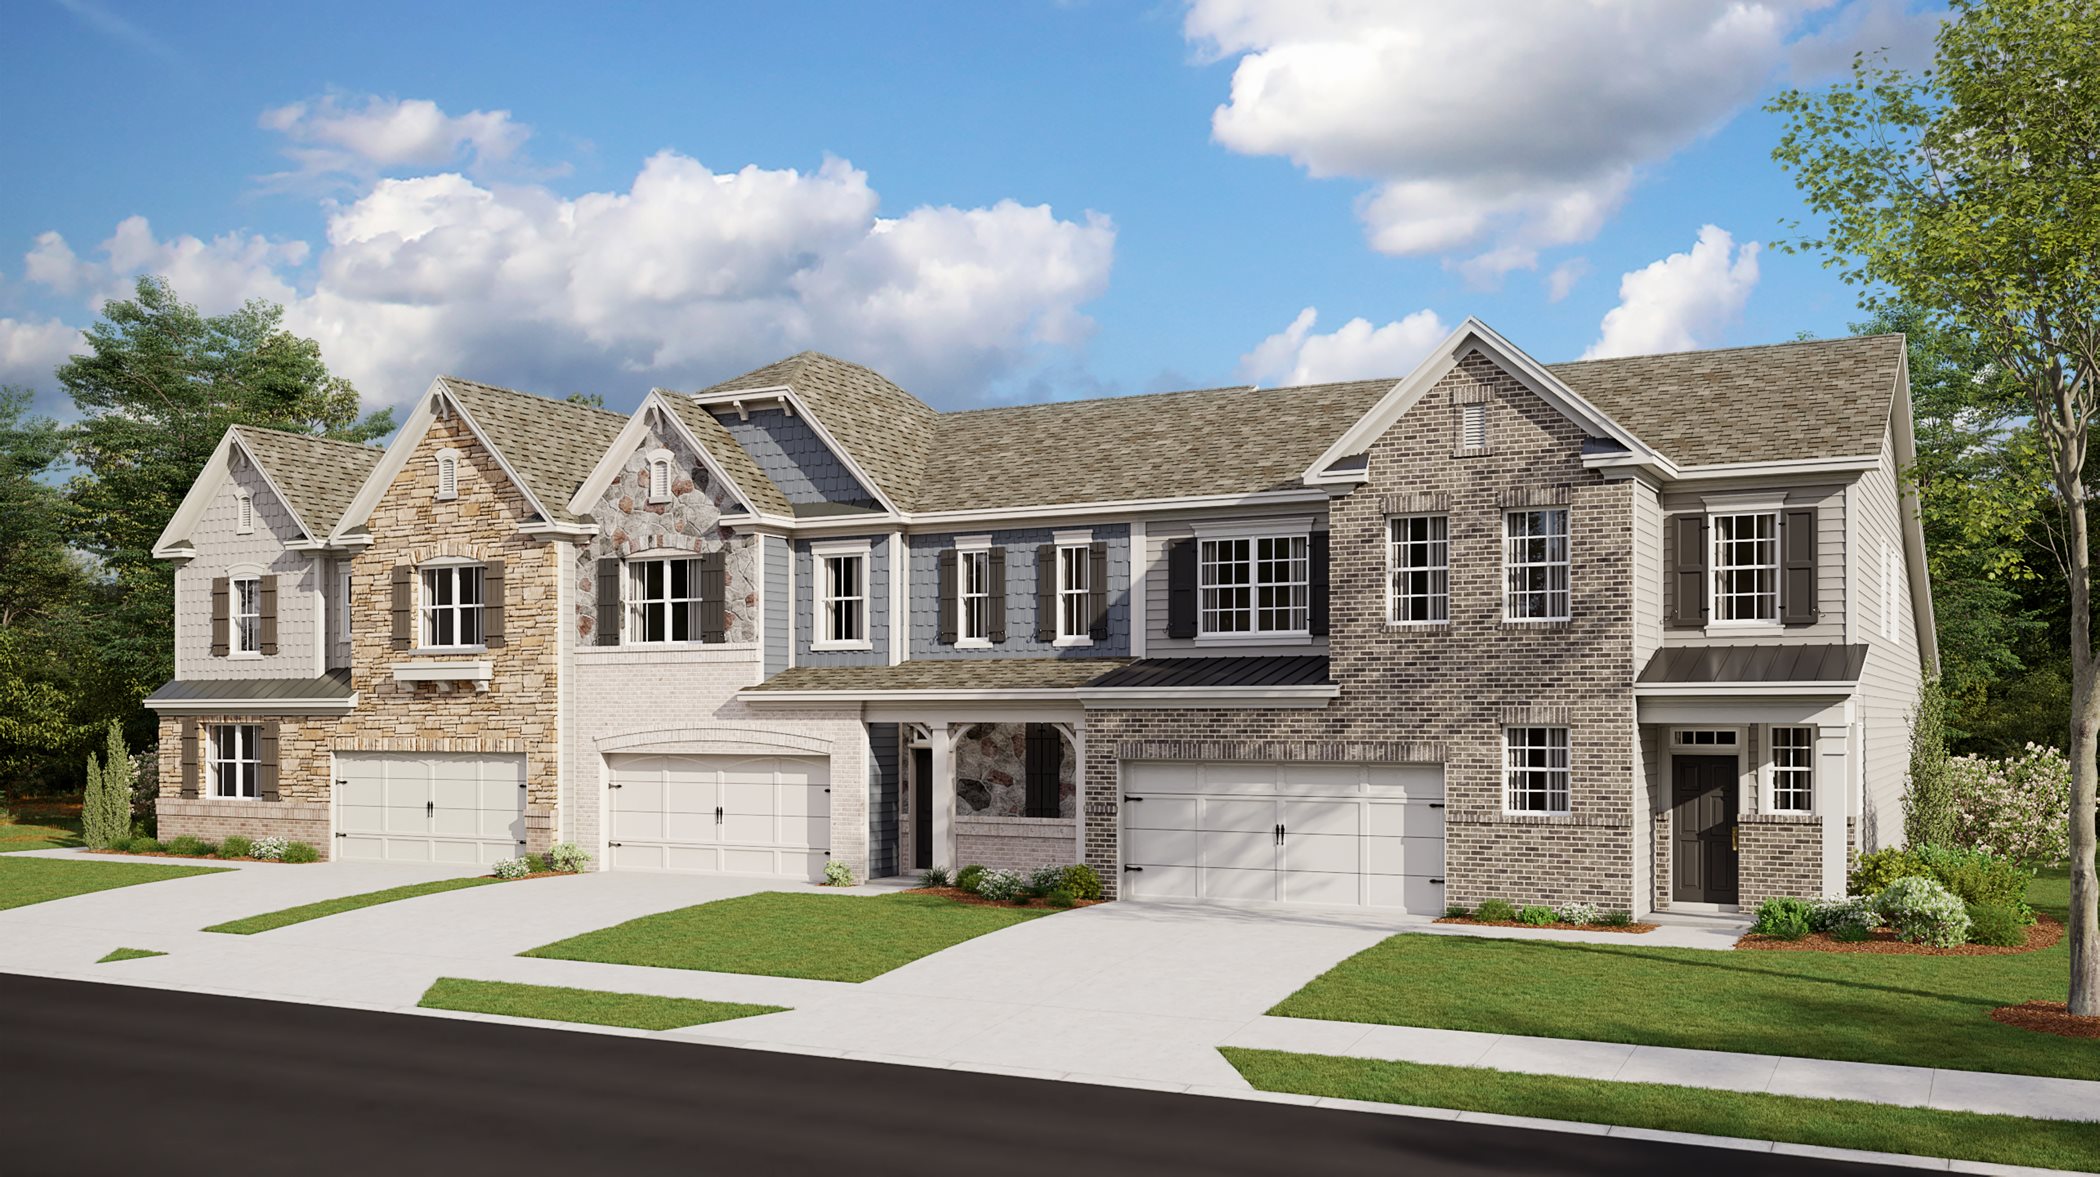 Row of townhomes at Whispering Woods